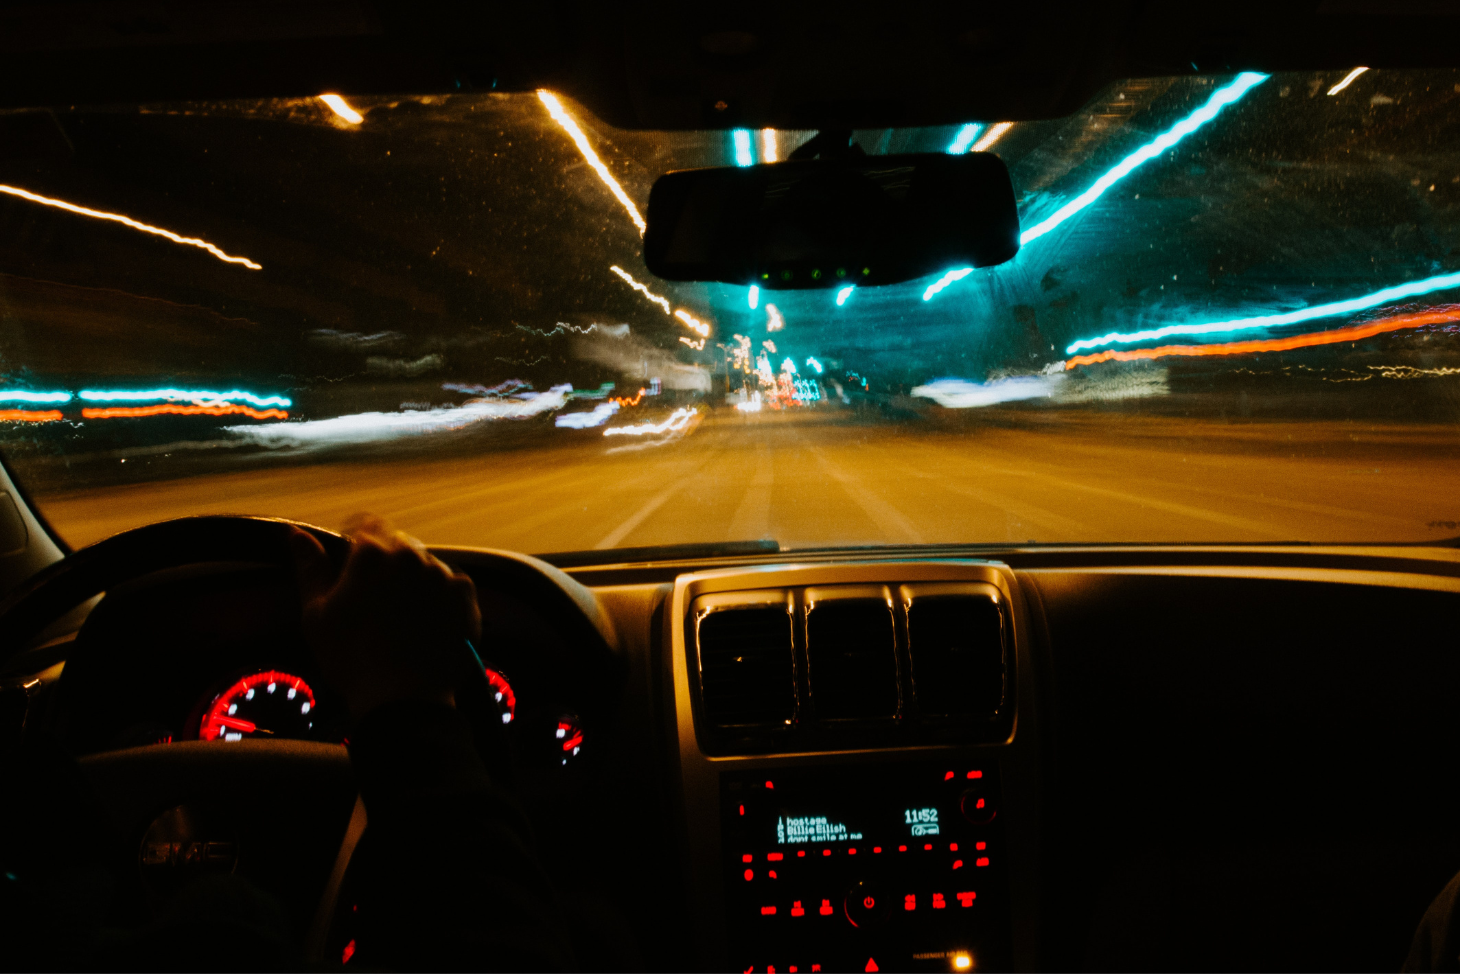 Blurry view through a car windshield at night